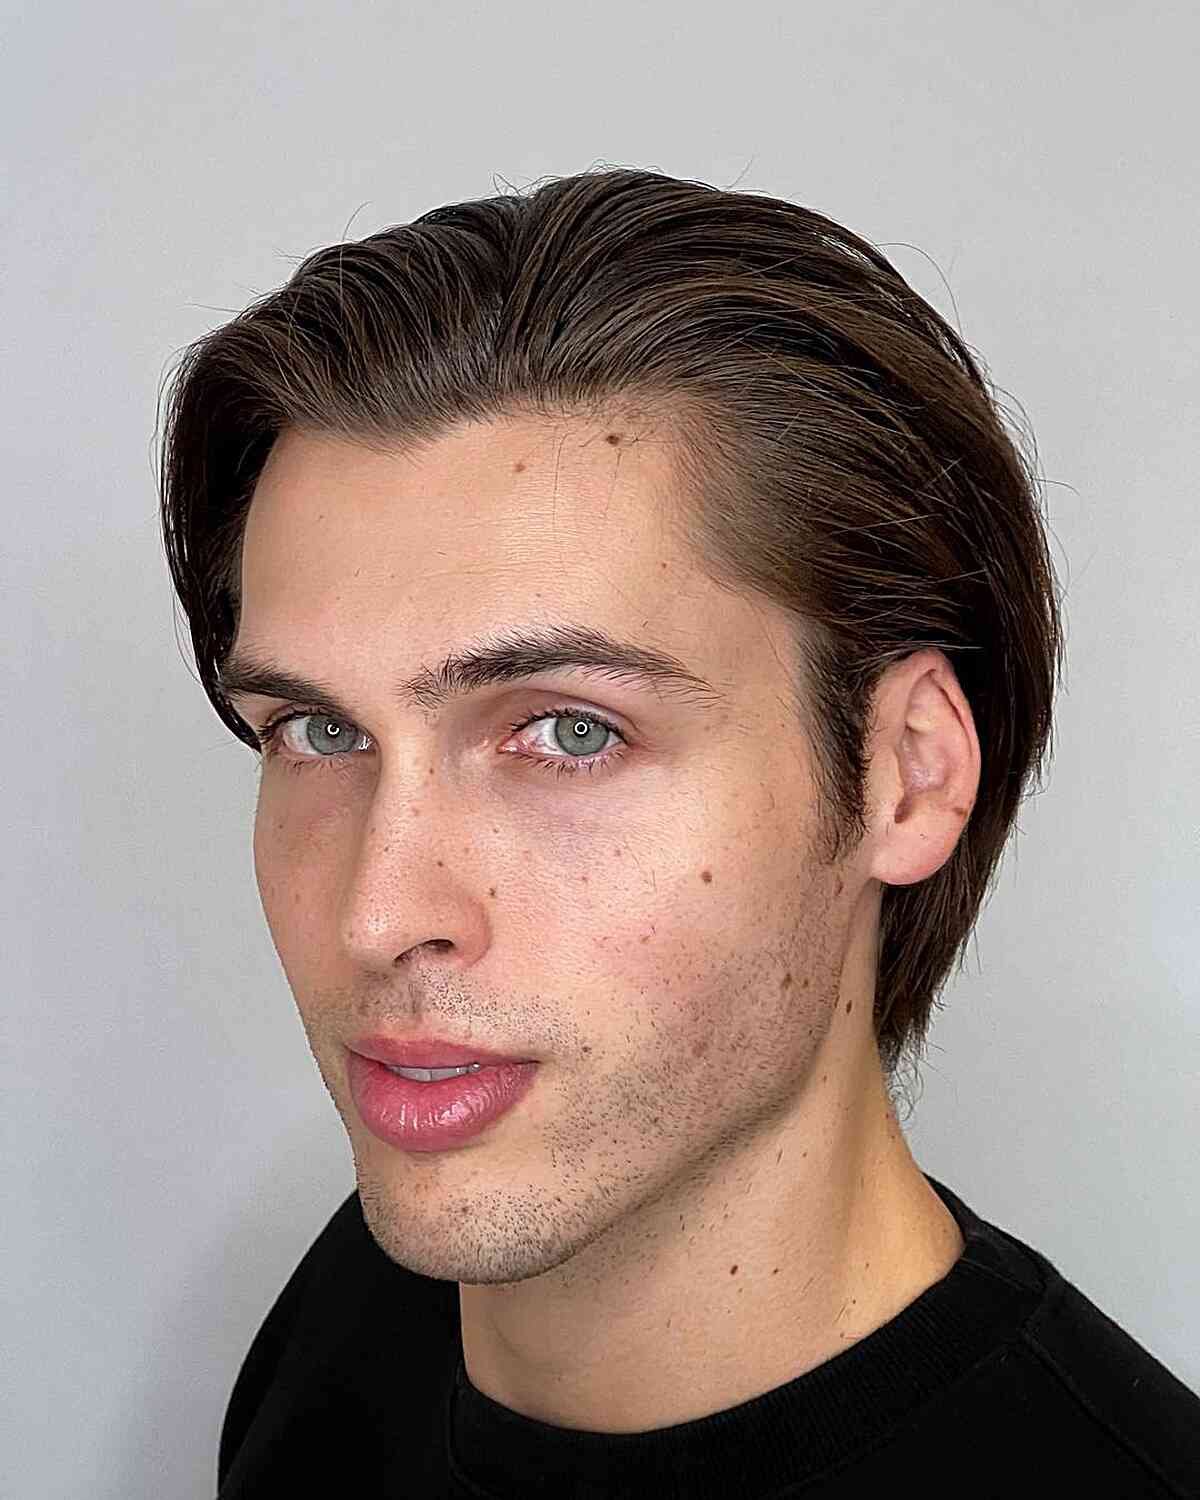 Medium-Length Slicked Back with No Fade for Guys